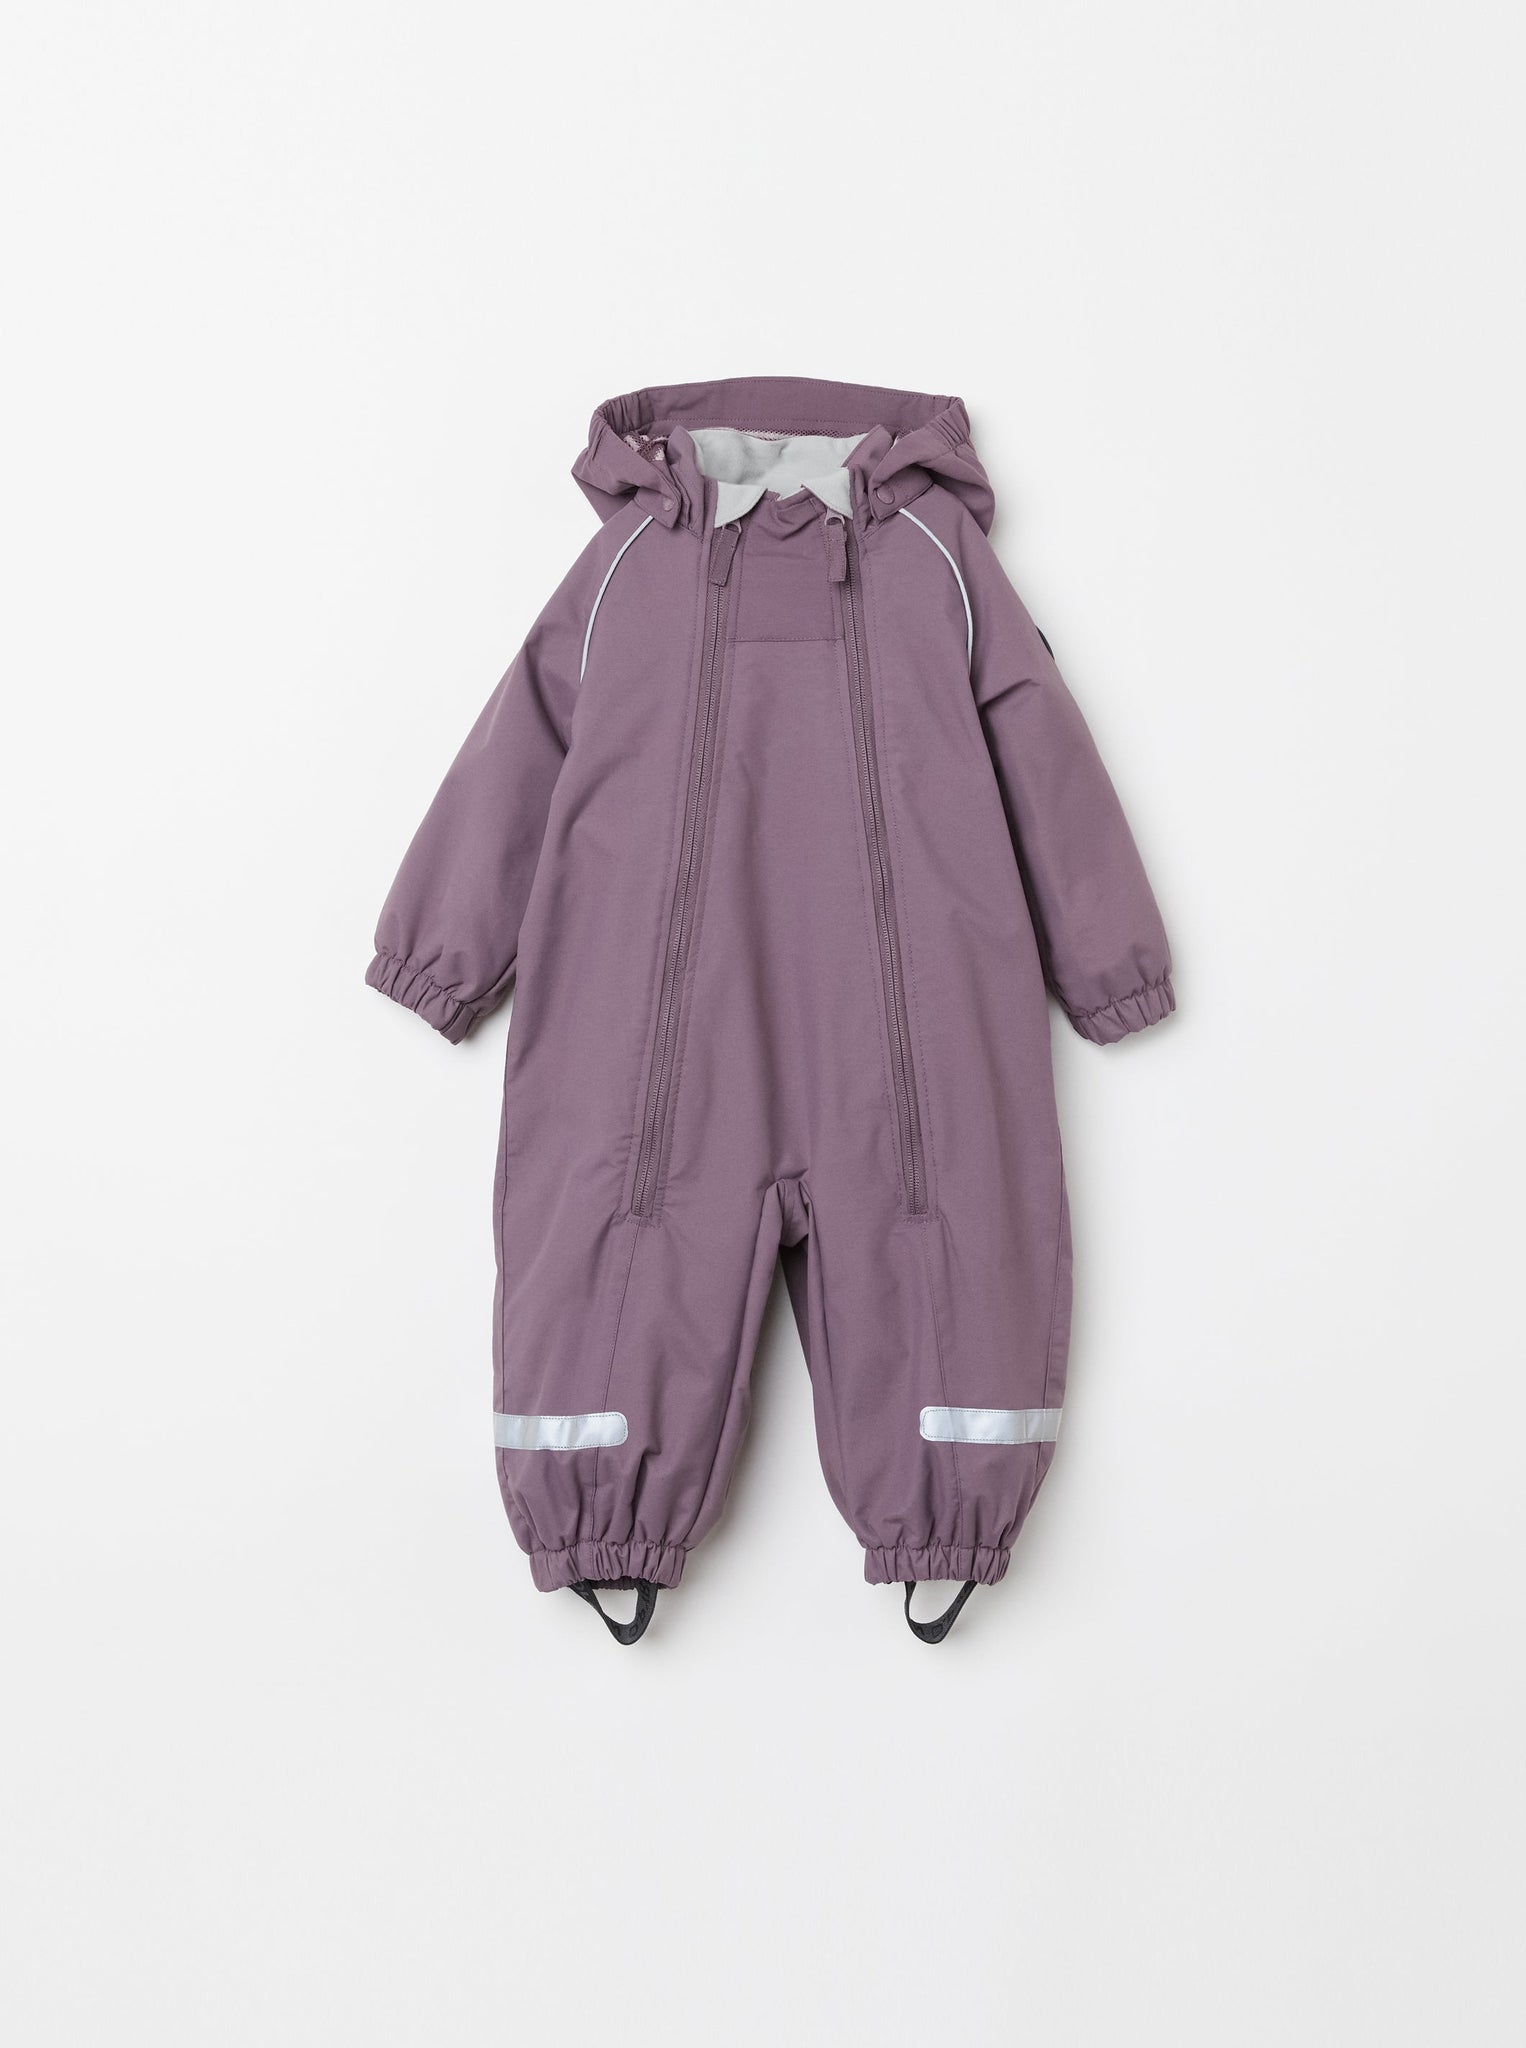 Purple Baby Waterproof Overall from the Polarn O. Pyret kidswear collection. Made from sustainable sources.